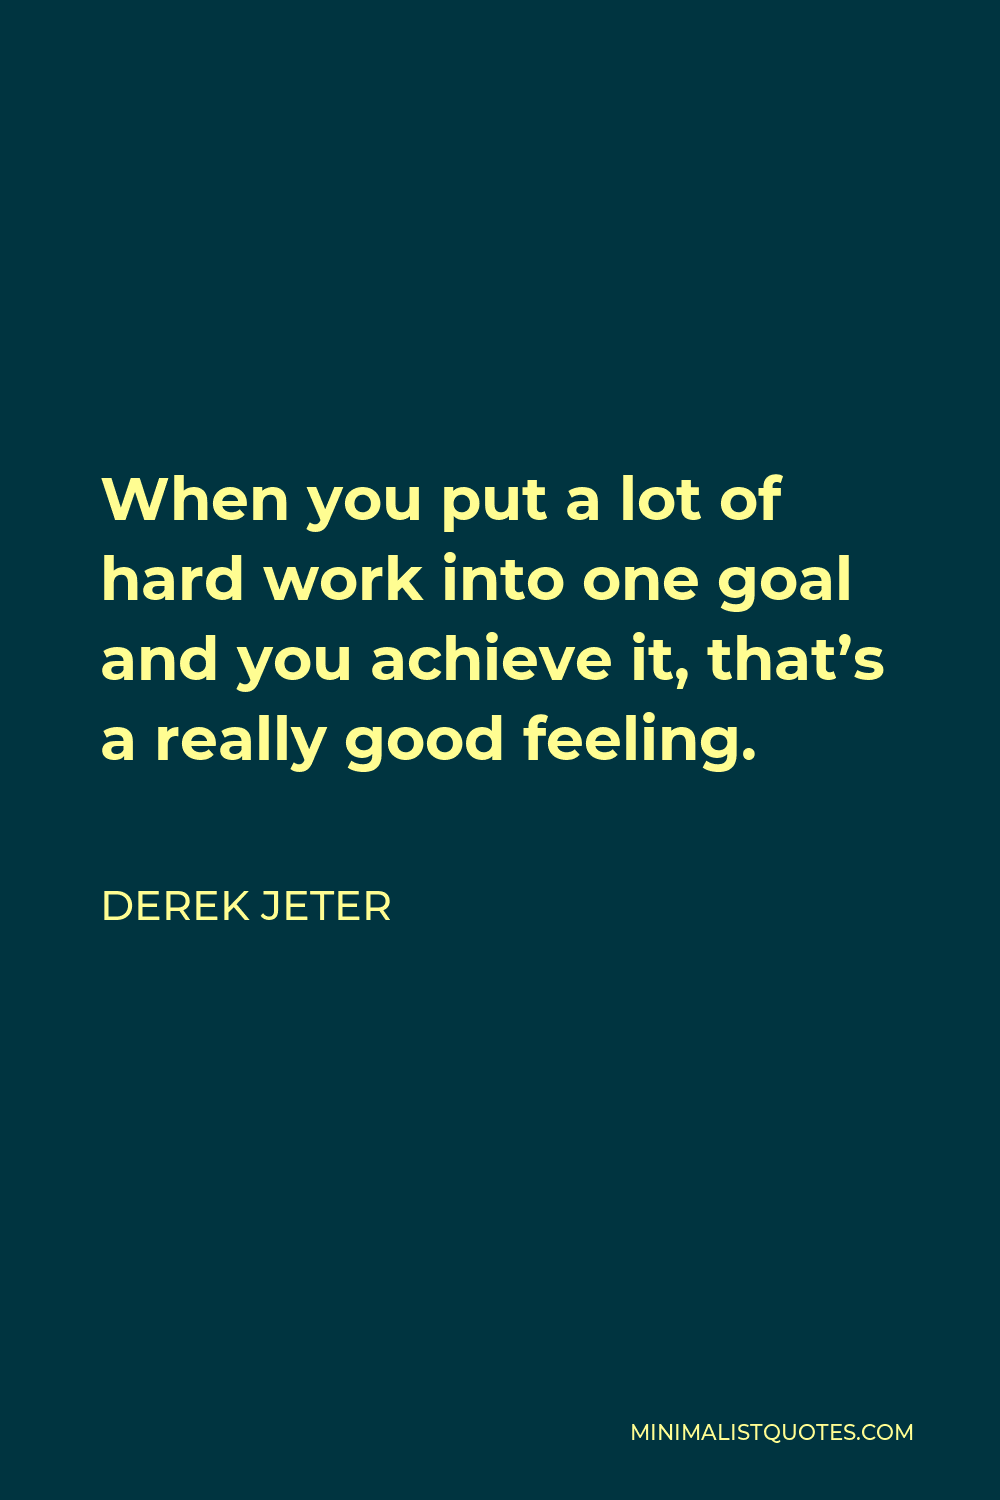 Free Derek Jeter - When you put a lot of hard work into one goal